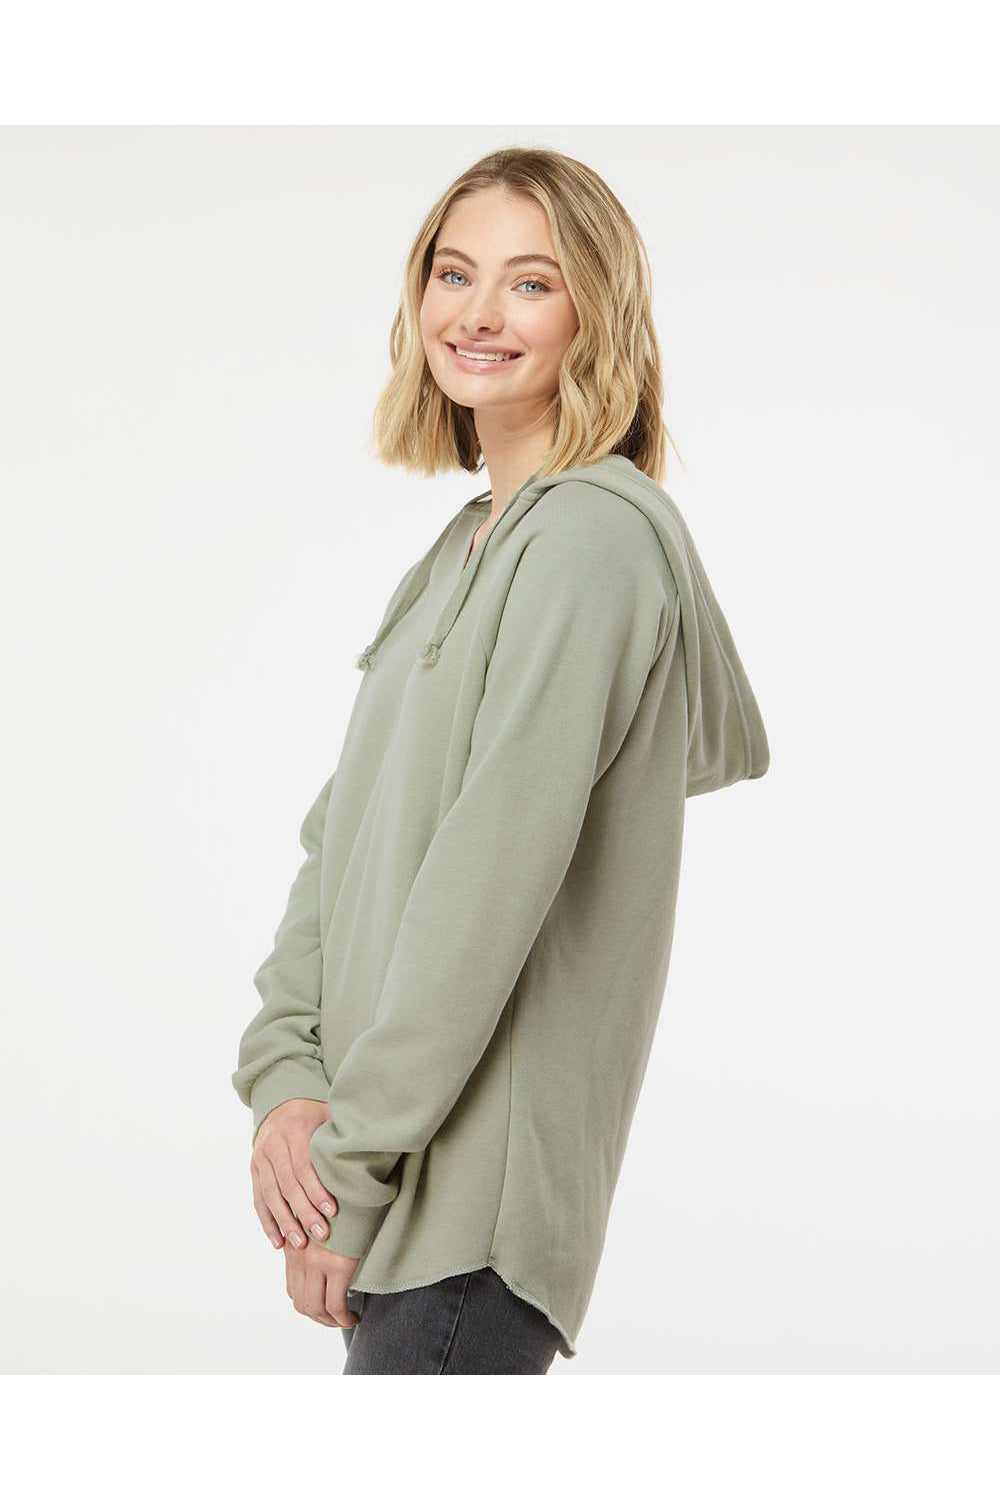 Independent Trading Co. PRM2500 Womens California Wave Wash Hooded Sweatshirt Hoodie Sage Green Model Side